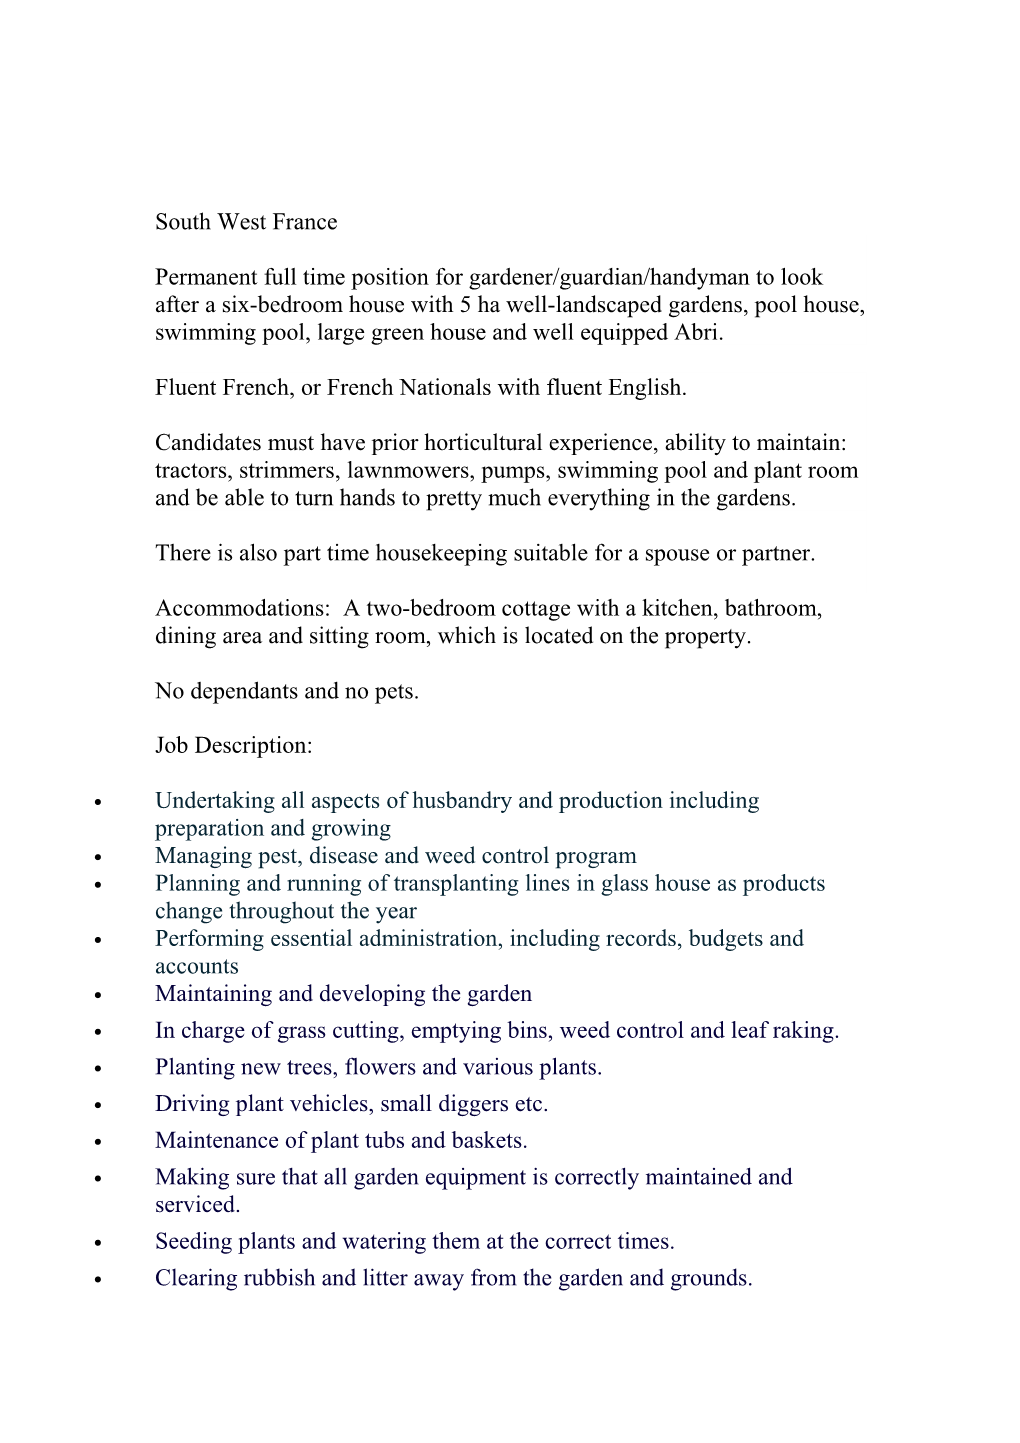 Fluent French, Or French Nationals with Fluent English